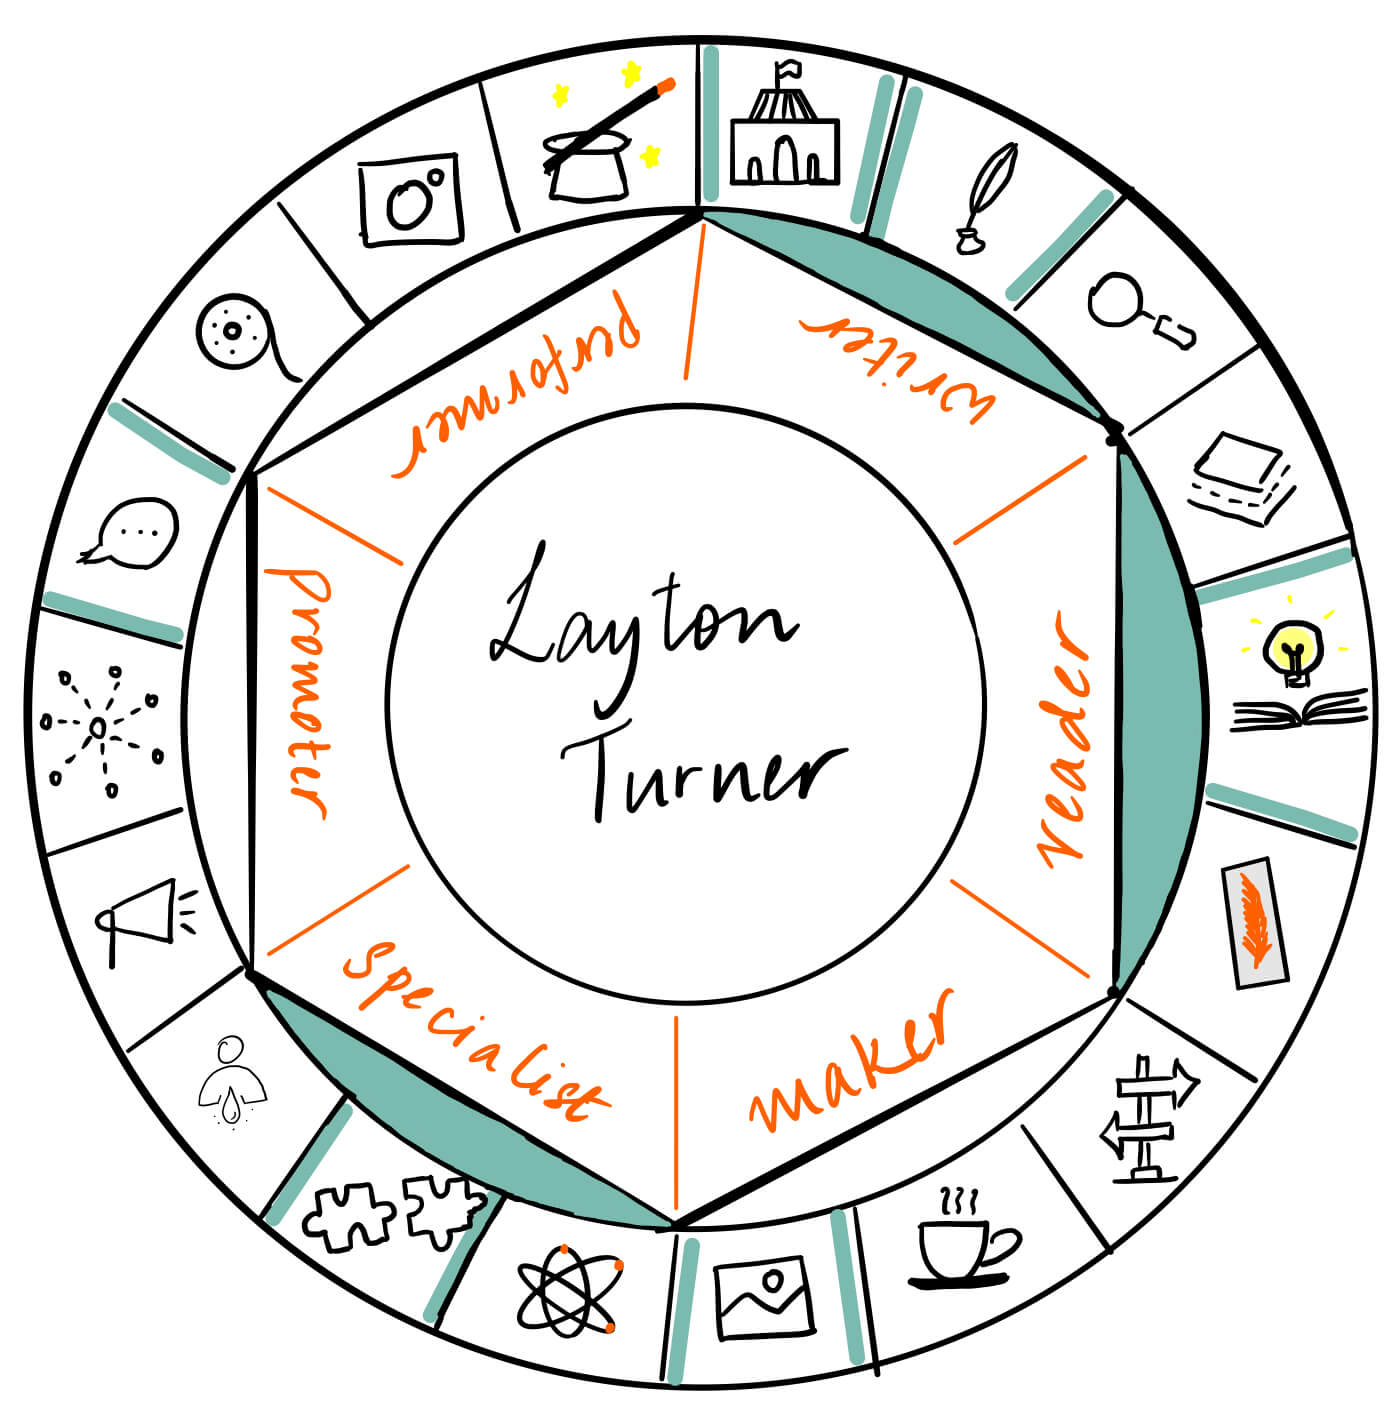 Layton Turner is a writer, reader and specialist. It's a pleasure to have her over for a guest post on The Creator's Roulette to talk about writing advice